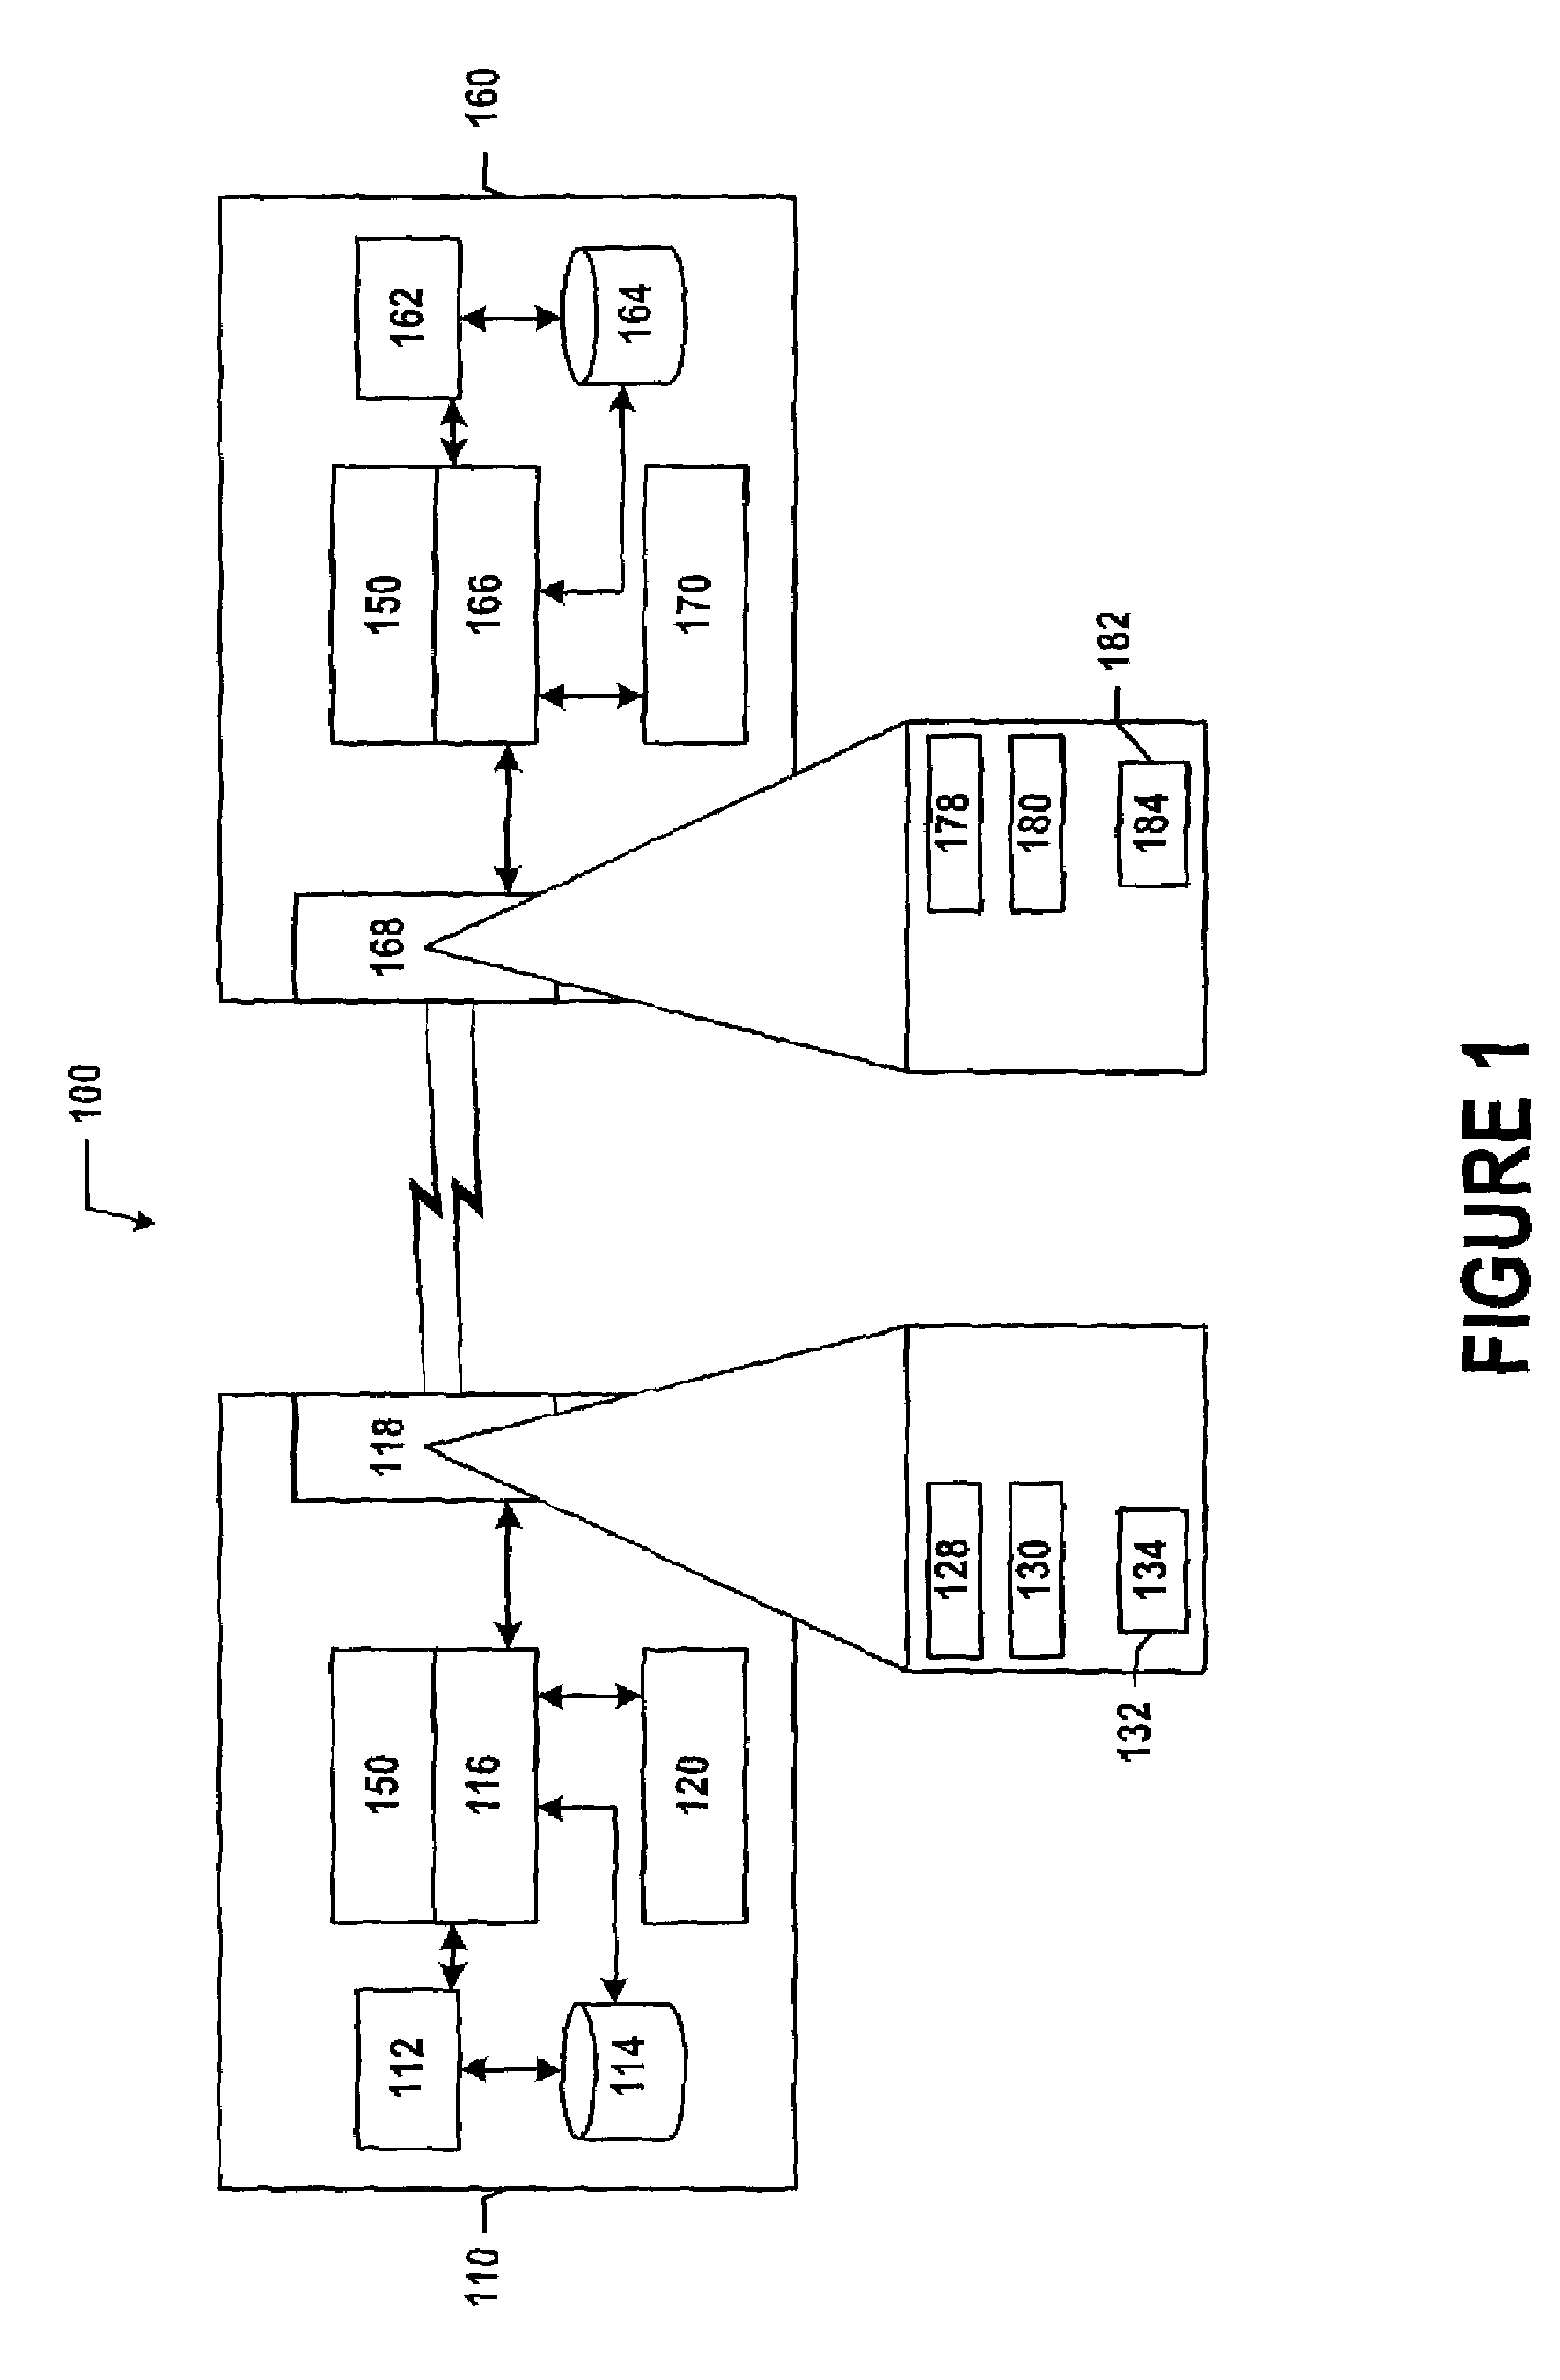 Method and system for automating node configuration to facilitate peer-to-peer communication